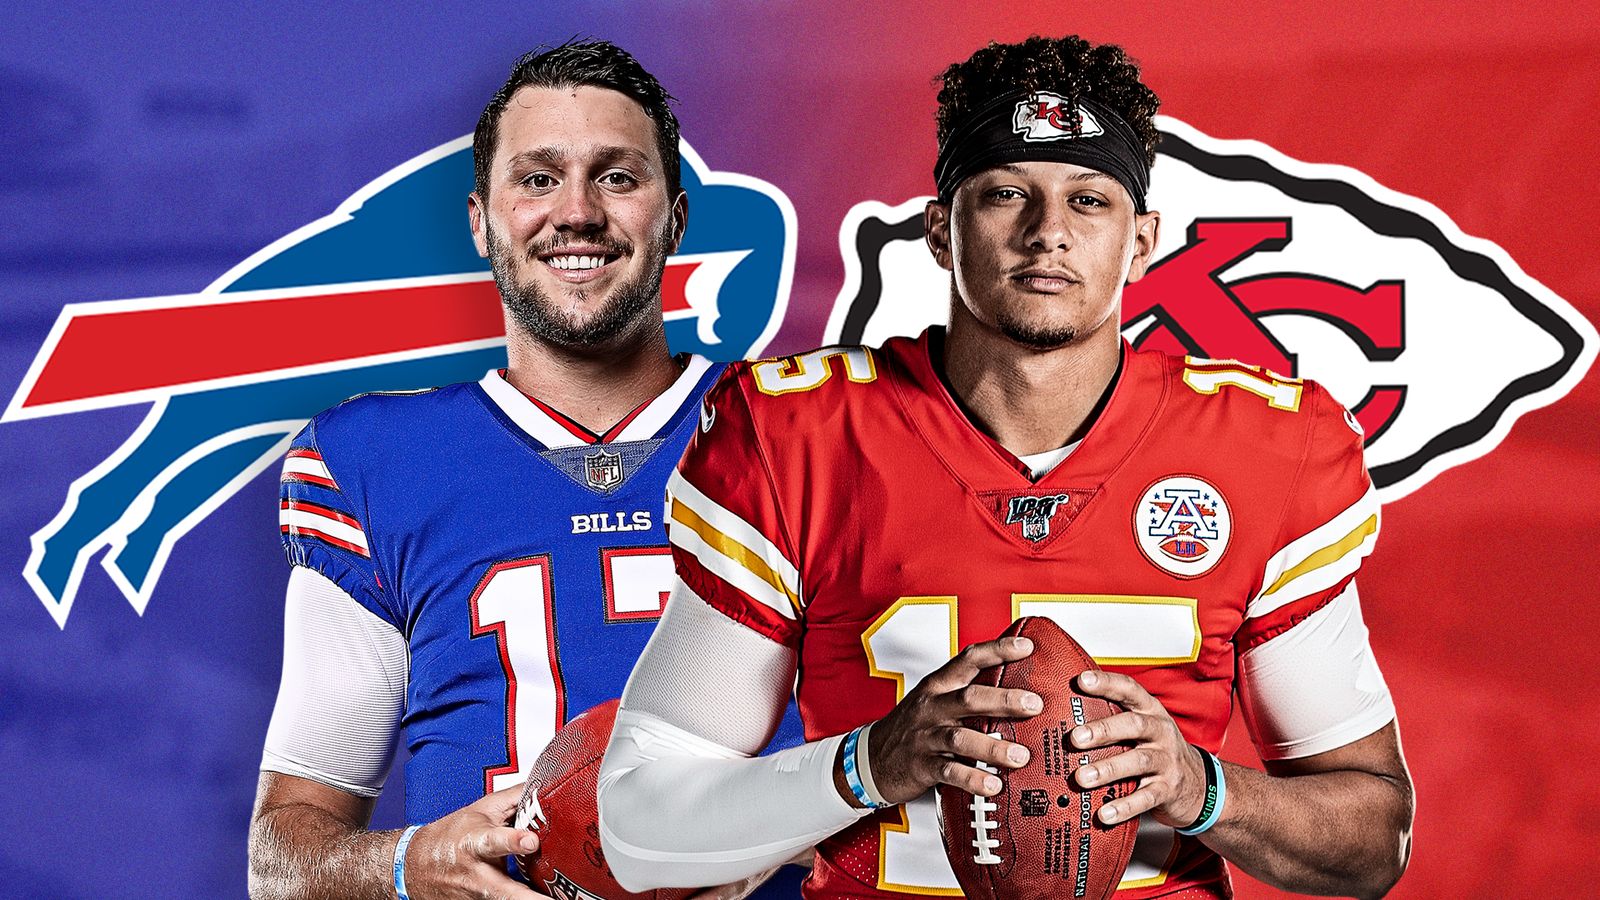 Jos Allen vs Patrick Mahomes: Superstars of the NFL and its next great rivalry